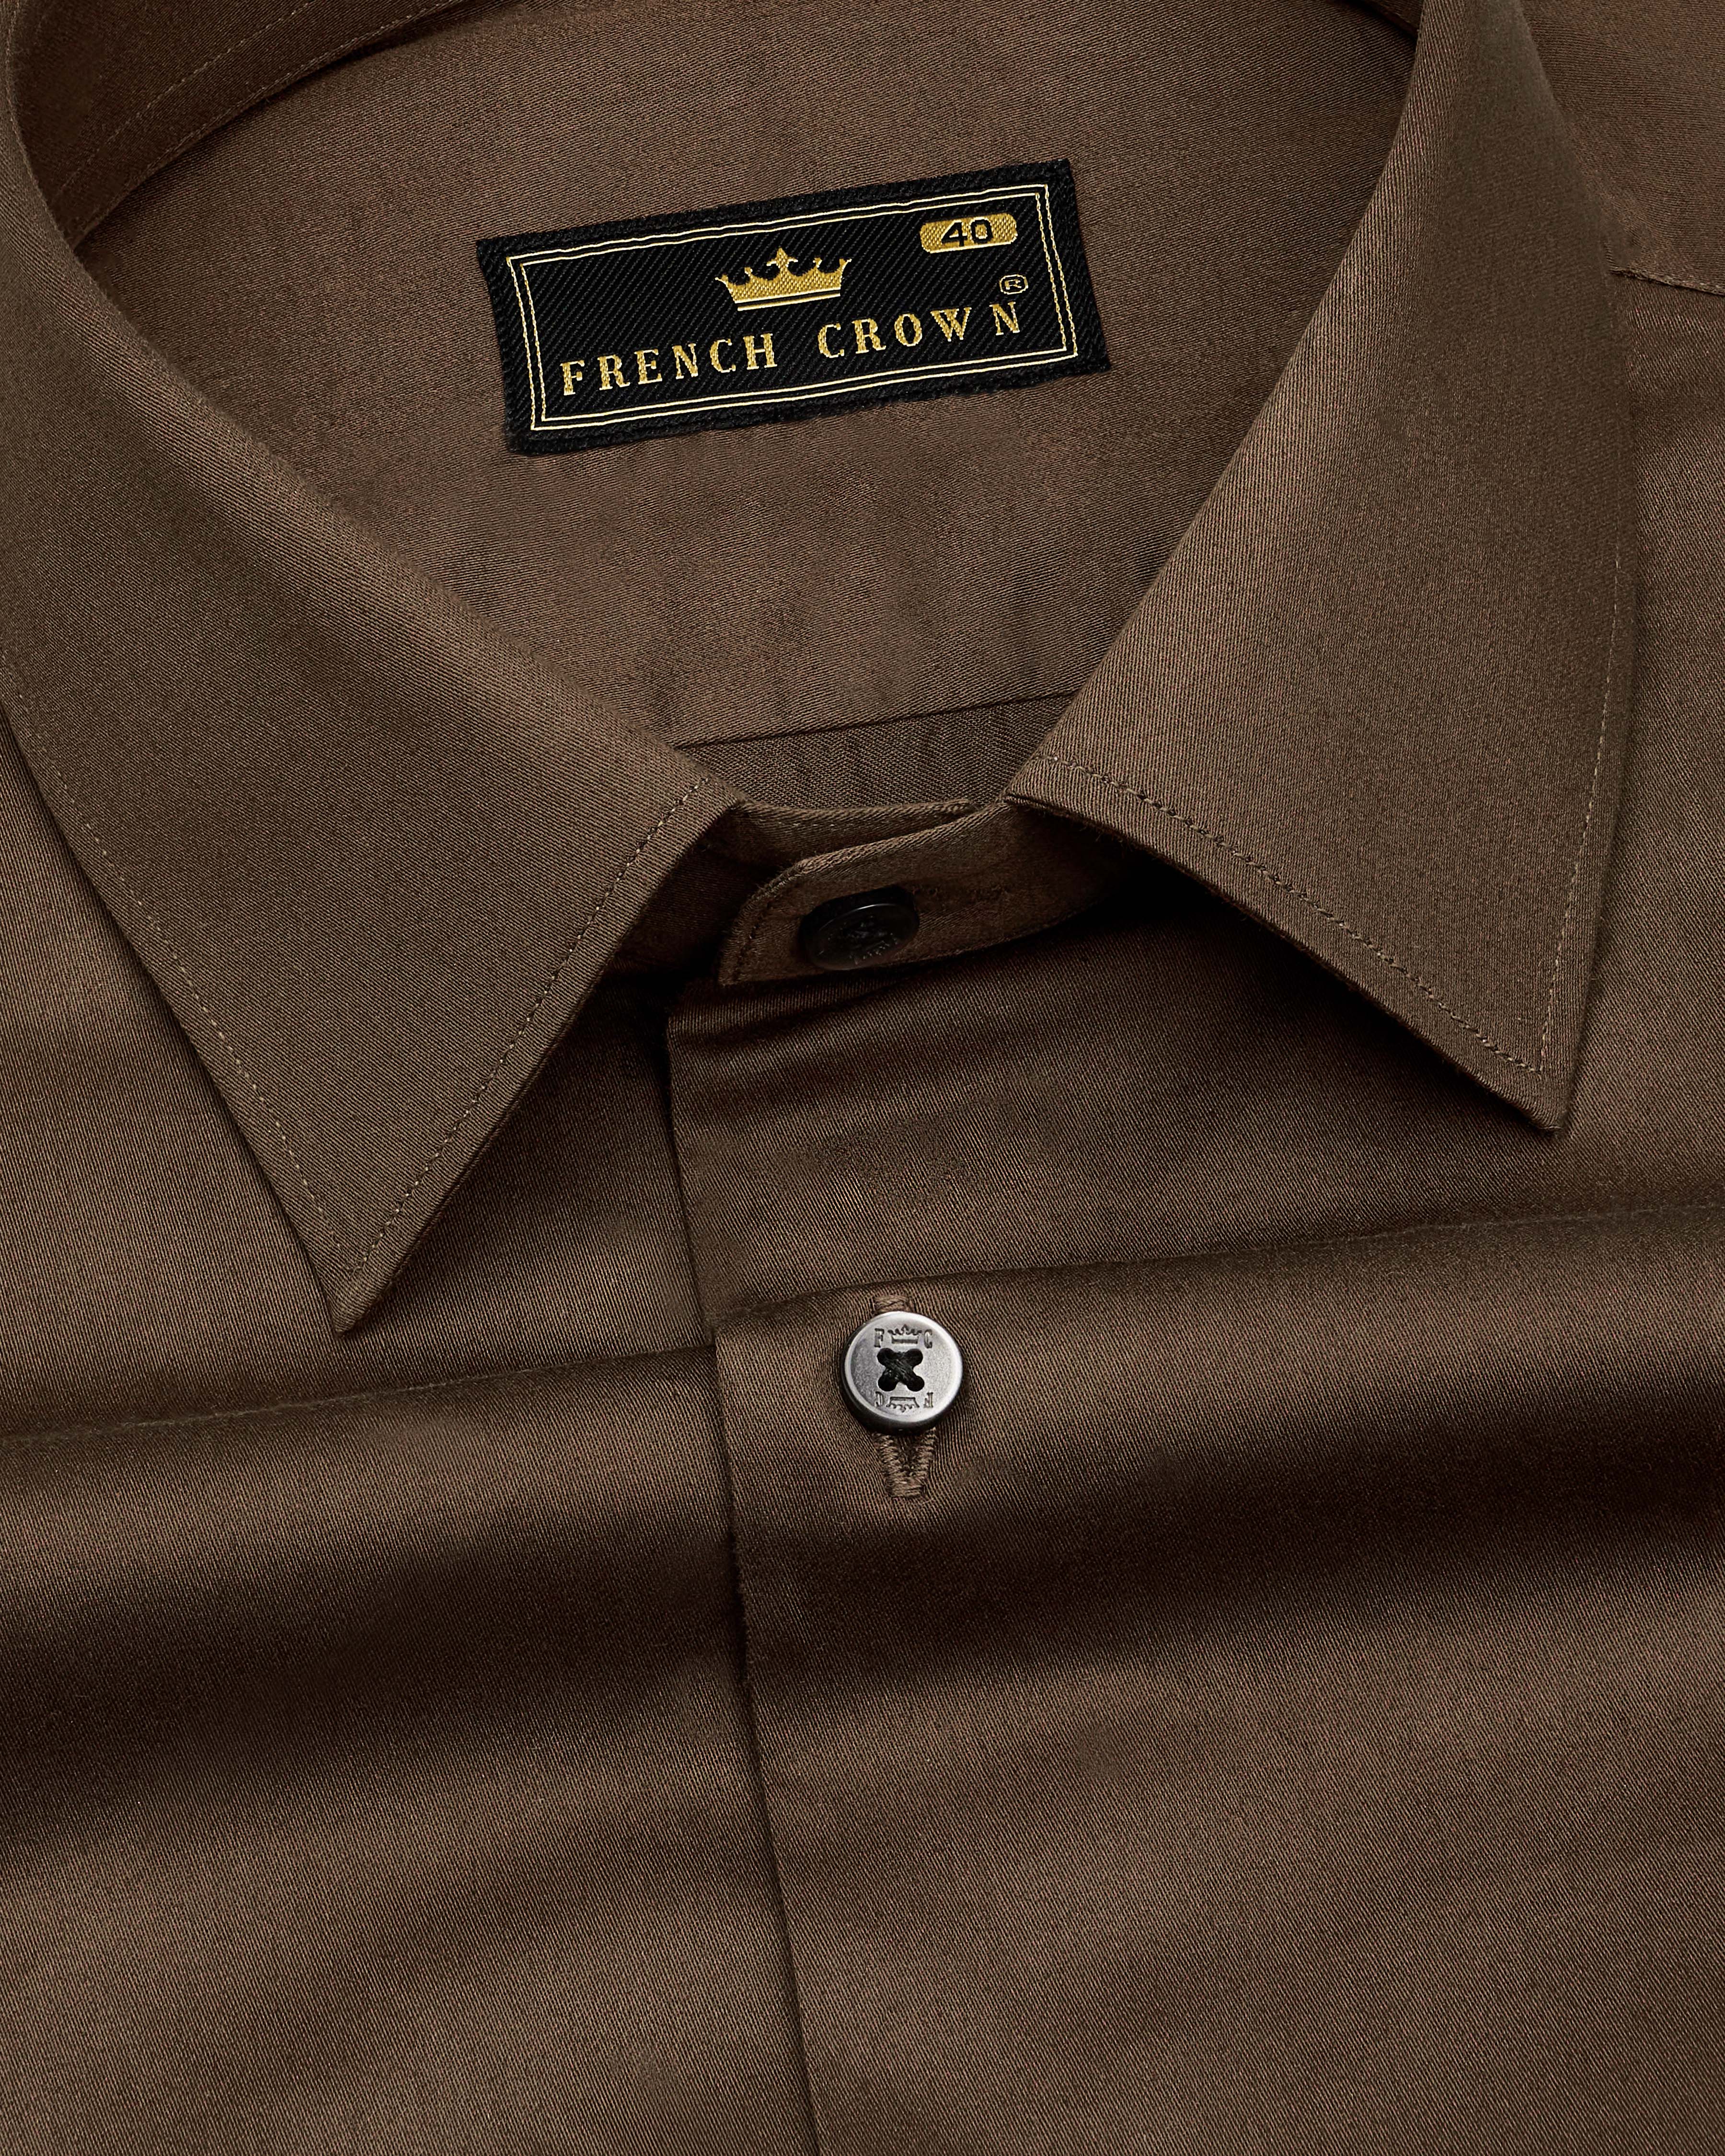 Millbrook Brown with Patch Subtle Sheen Pocket and Bicycle Super Soft Premium Cotton Shirt 9020-BLK-E033-38, 9020-BLK-E033-H-38, 9020-BLK-E033-39, 9020-BLK-E033-H-39, 9020-BLK-E033-40, 9020-BLK-E033-H-40, 9020-BLK-E033-42, 9020-BLK-E033-H-42, 9020-BLK-E033-44, 9020-BLK-E033-H-44, 9020-BLK-E033-46, 9020-BLK-E033-H-46, 9020-BLK-E033-48, 9020-BLK-E033-H-48, 9020-BLK-E033-50, 9020-BLK-E033-H-50, 9020-BLK-E033-52, 9020-BLK-E033-H-52